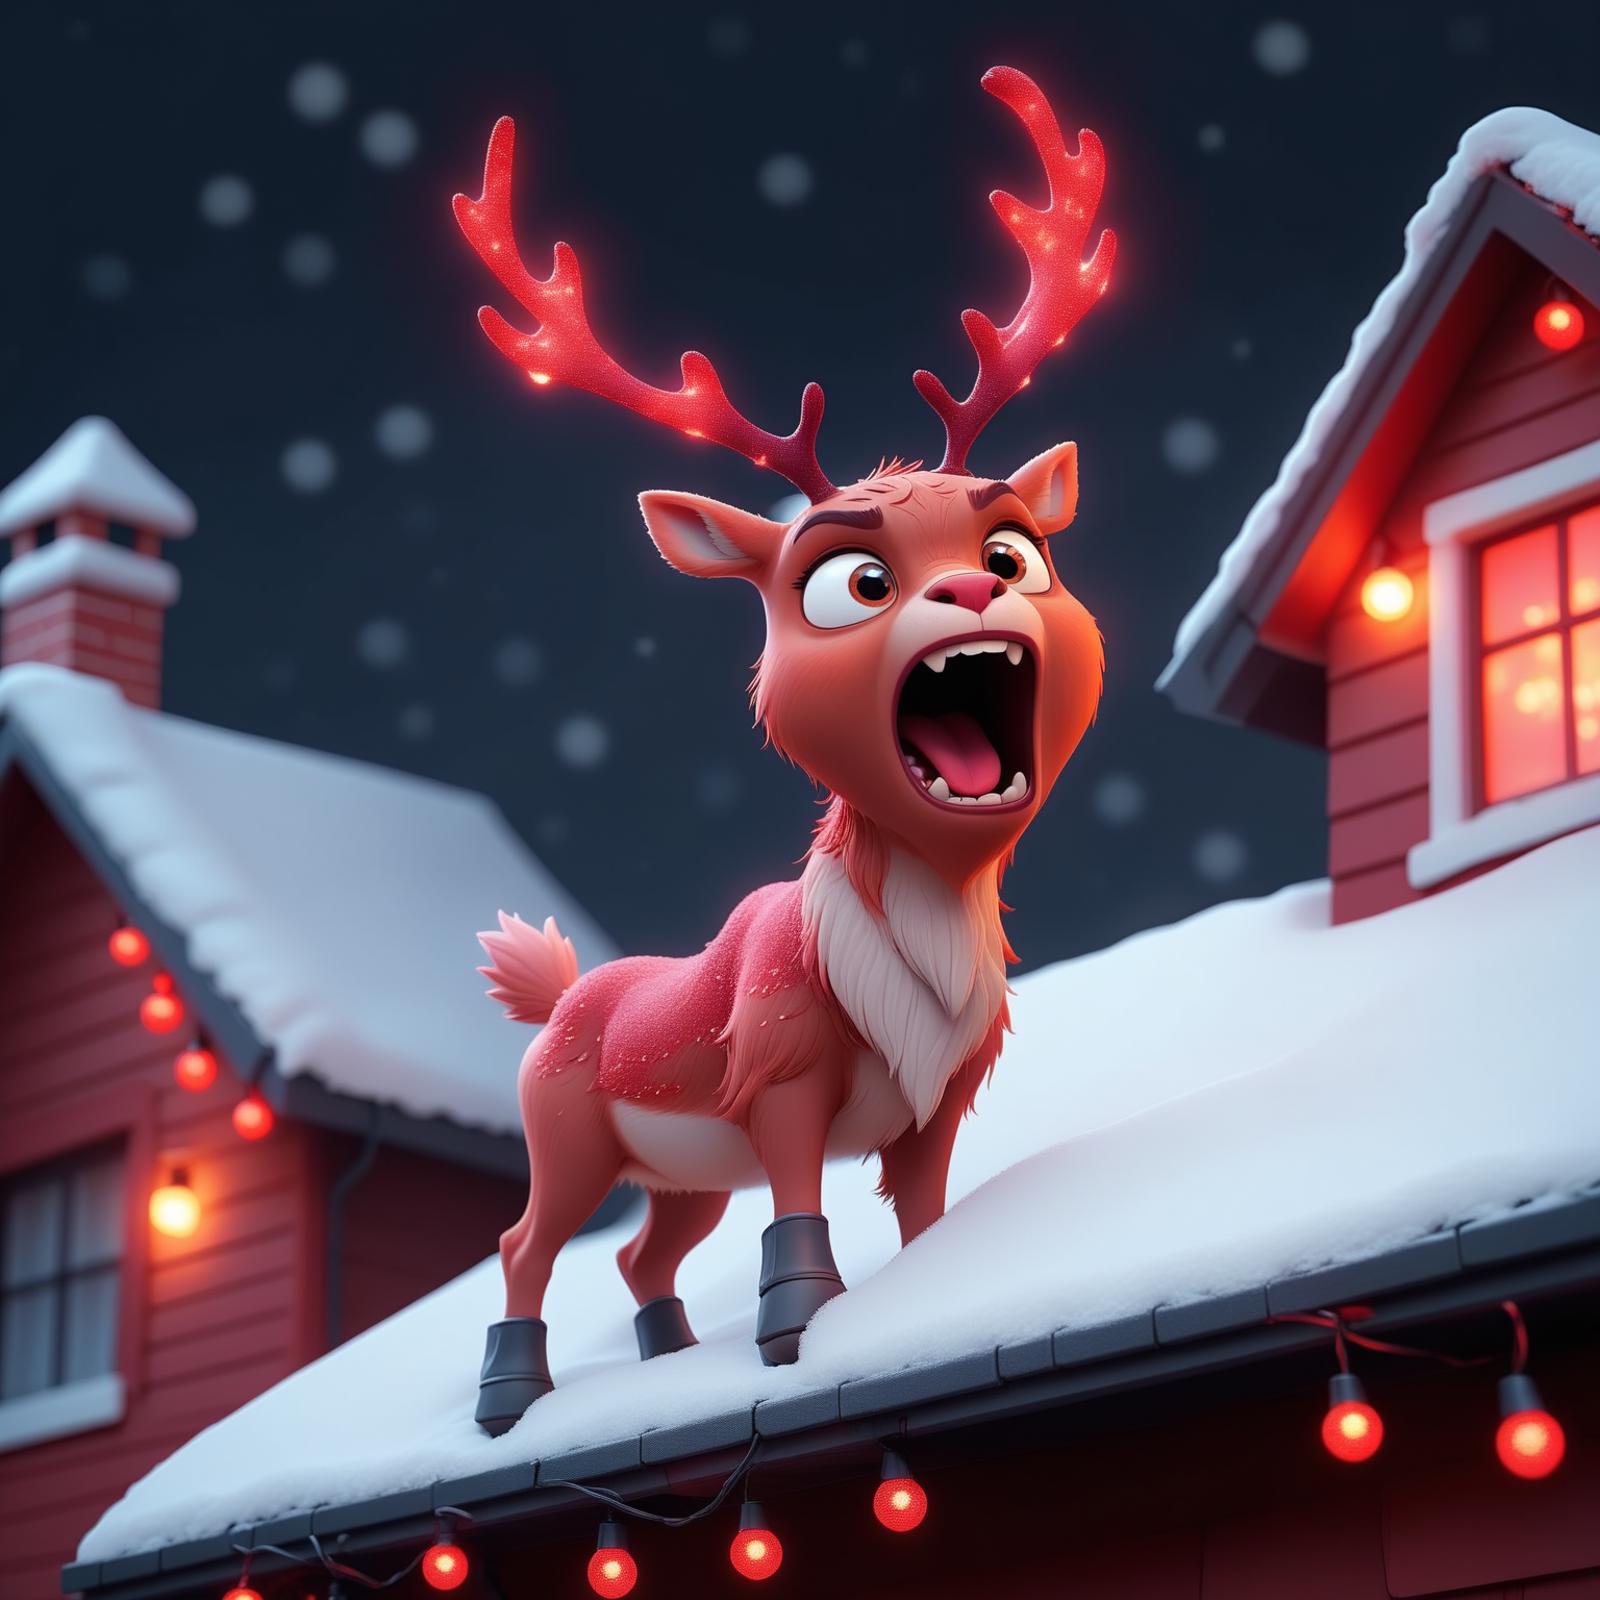 A cartoon reindeer with a red nose standing on a rooftop.